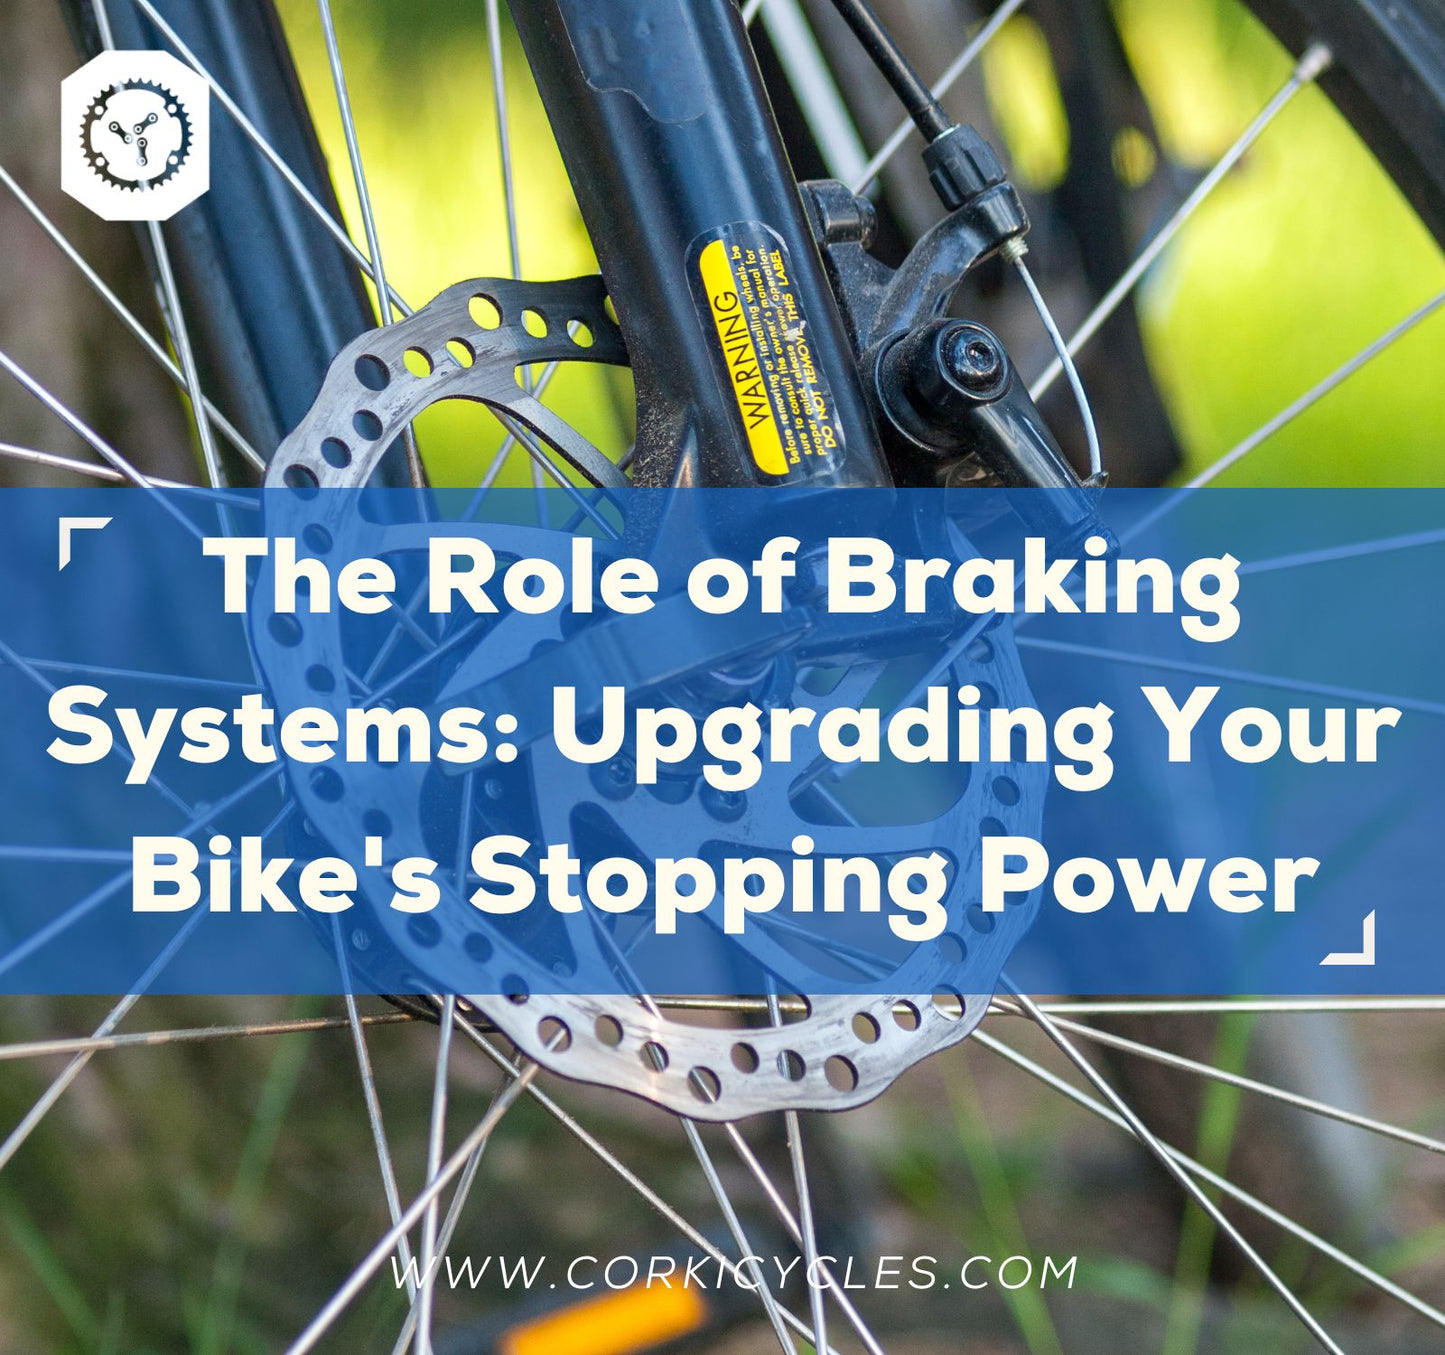 The Role of Braking Systems: Upgrading Your Bike's Stopping Power - Corki Cycles